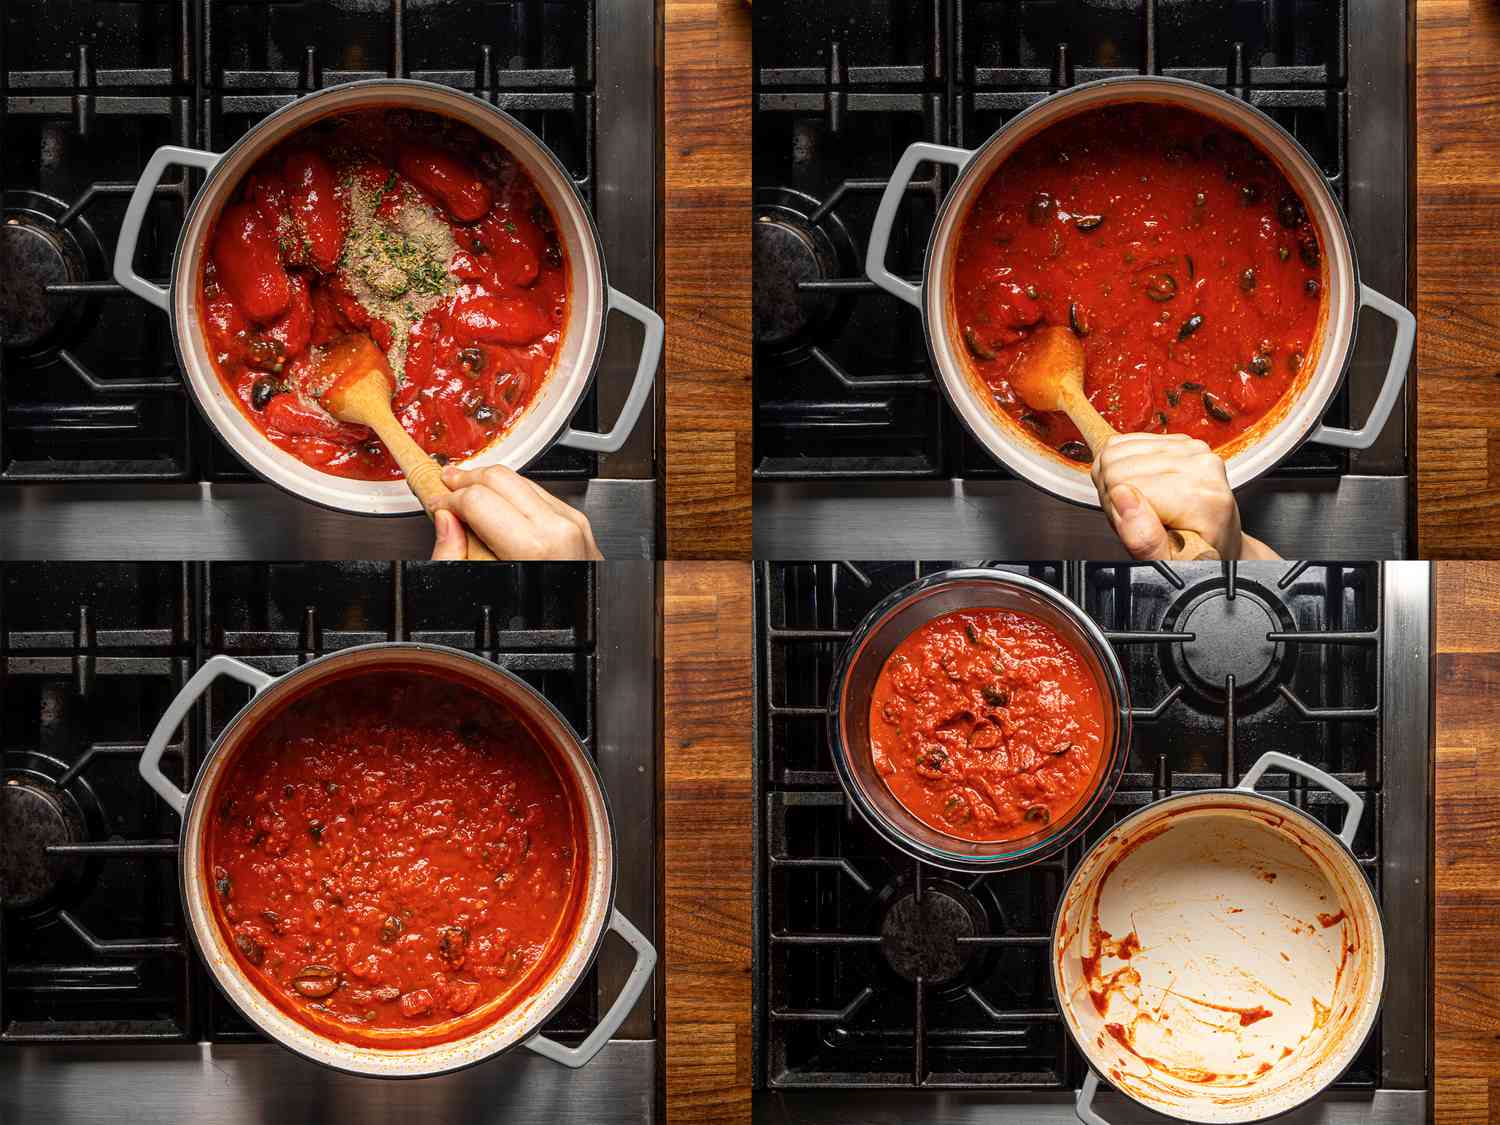 Four image collage of adding tomatoes and spices, stirring, boiling and removing sauce from dutch oven